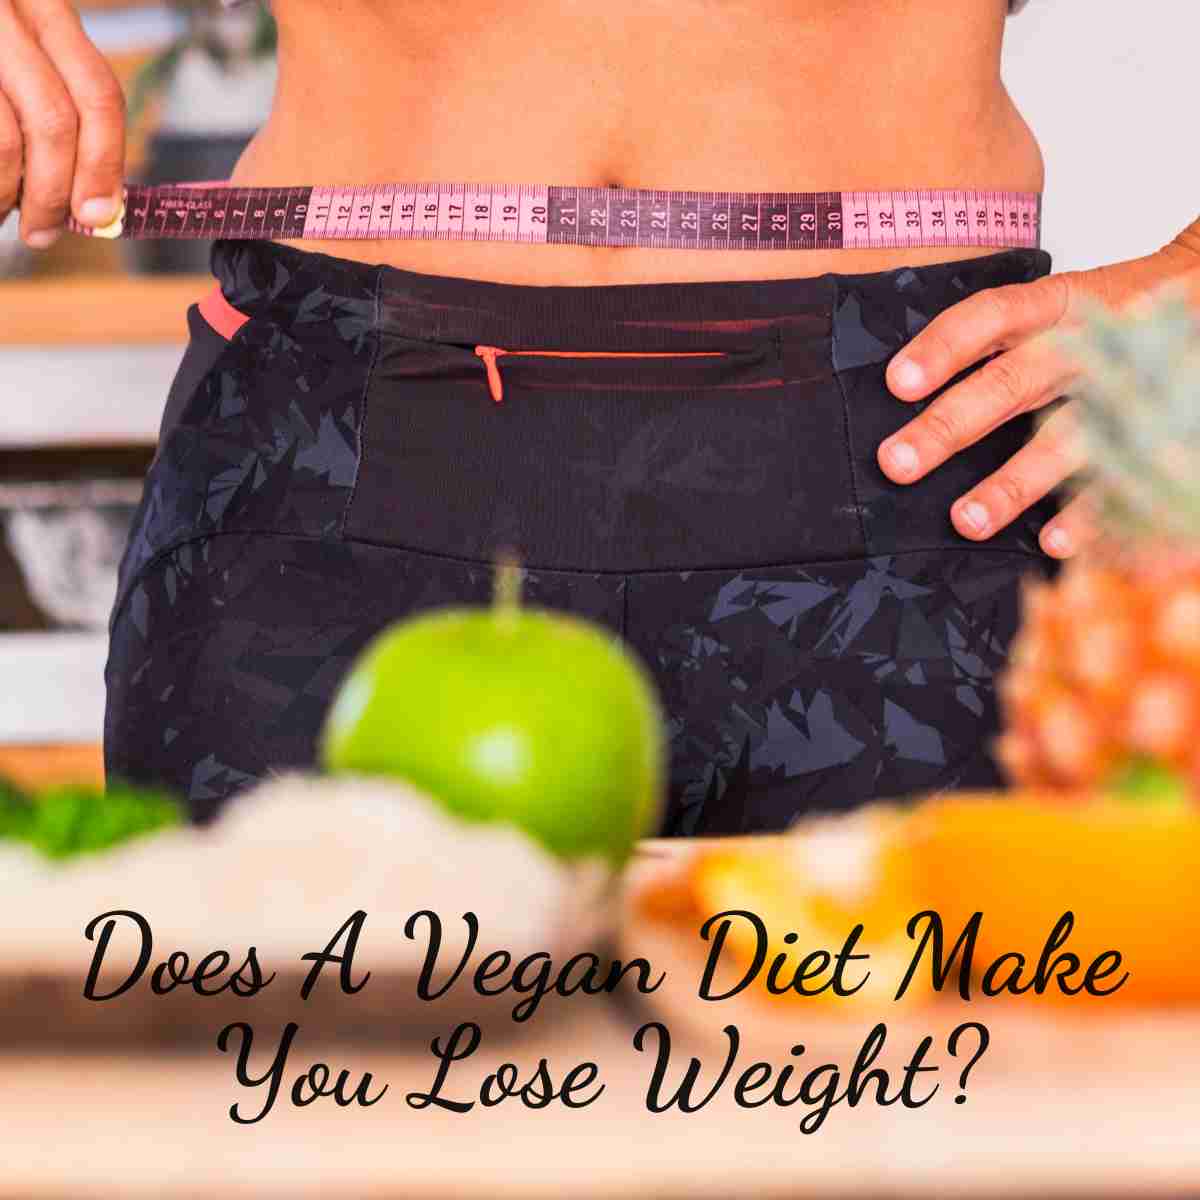 Does A Vegan Diet Make You Lose Weight?